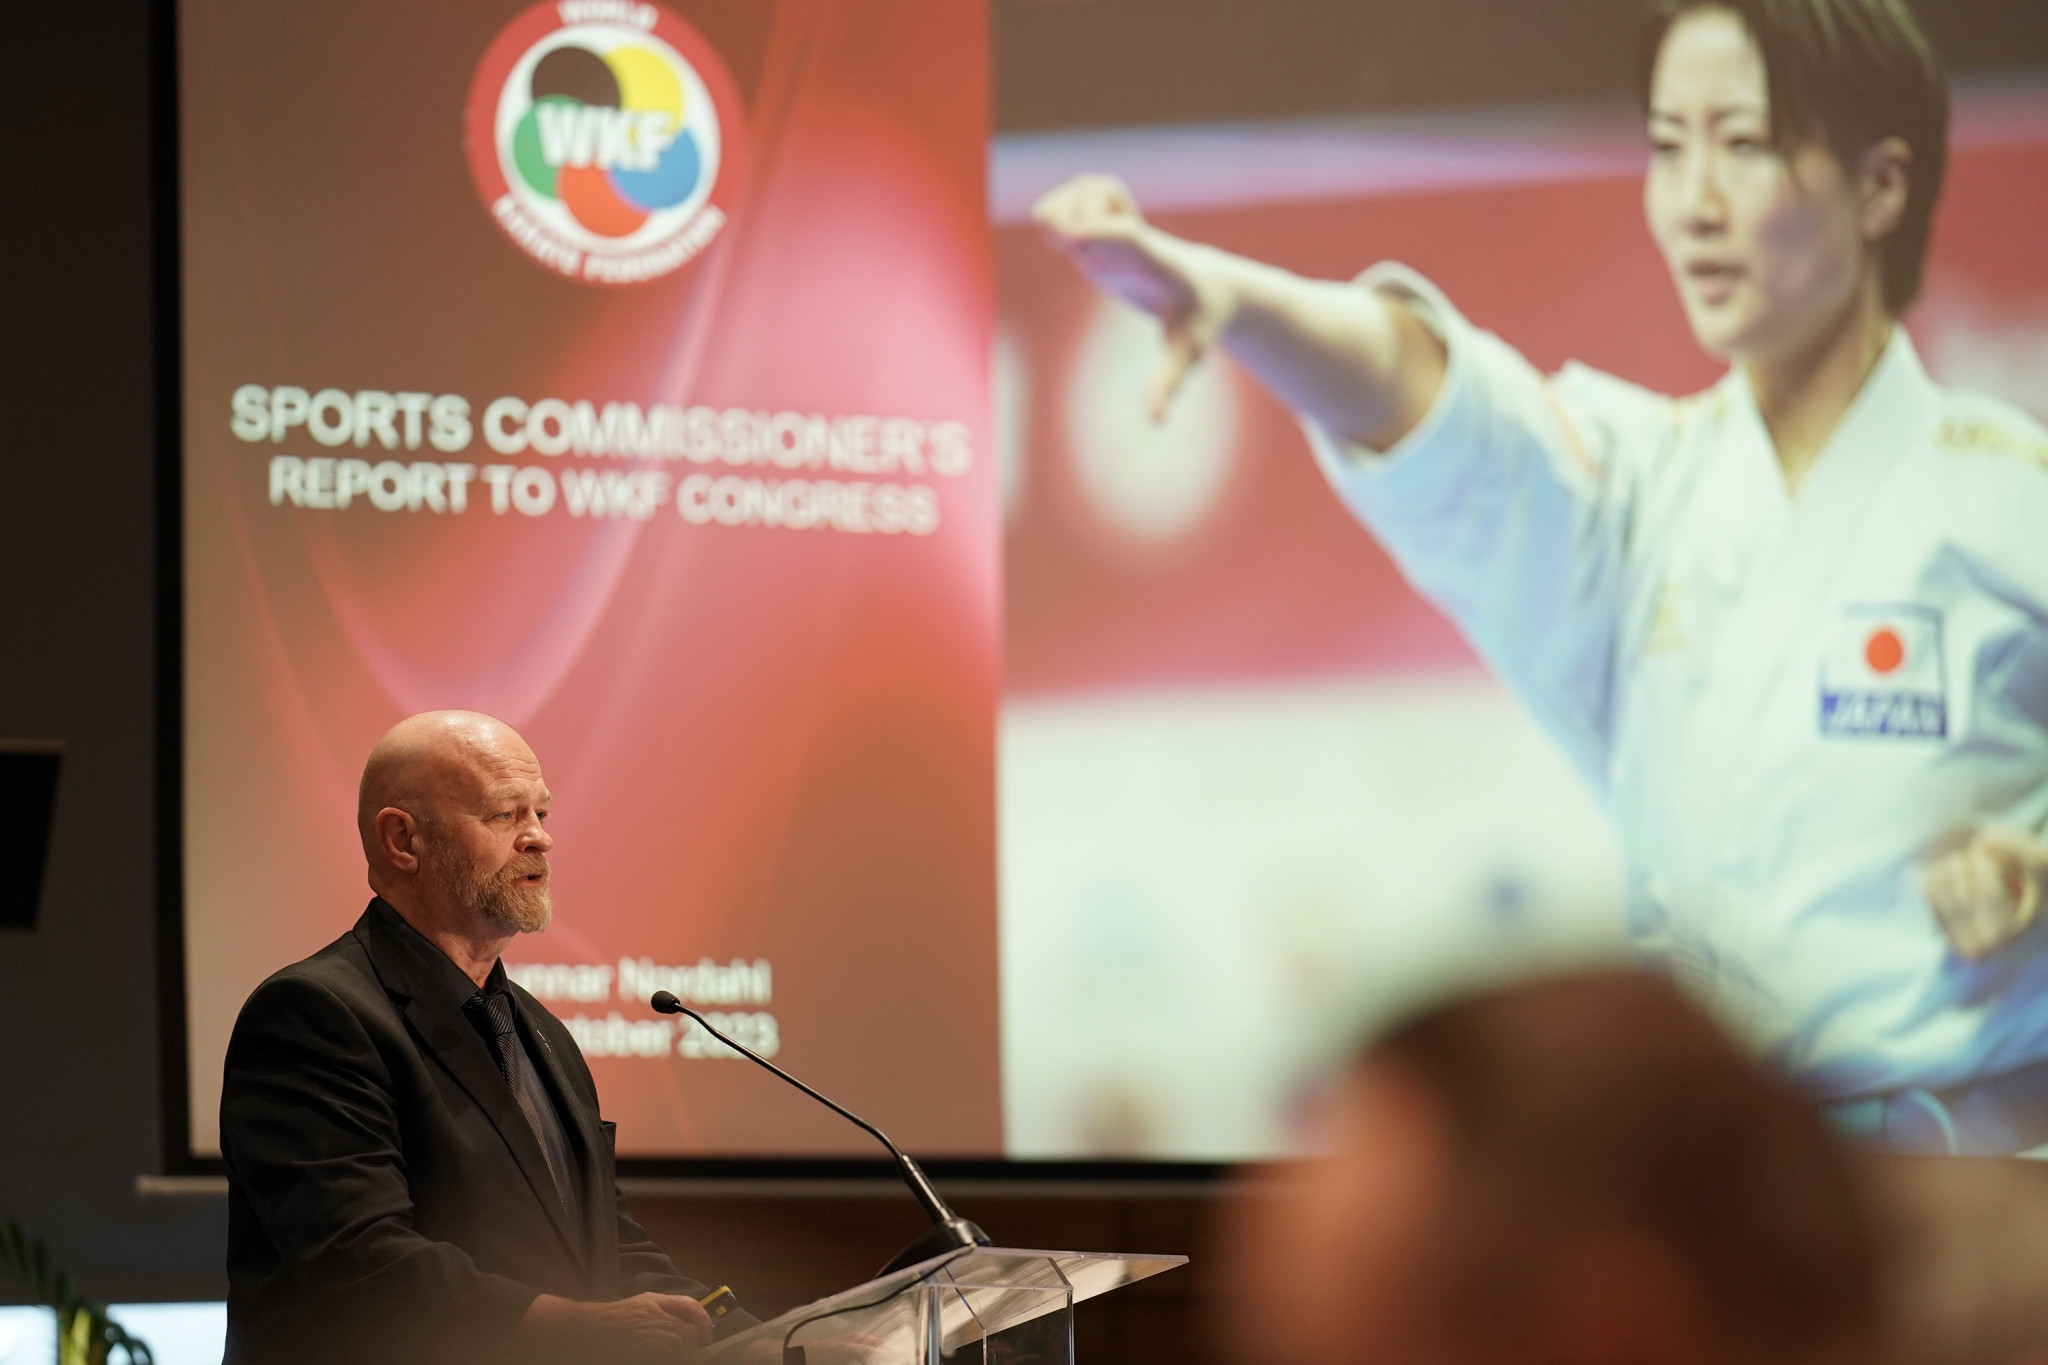 Gunnar Nordahl, chair of the WKF Sports Commission, underlined the work of the group over the past 12 months ©WKF